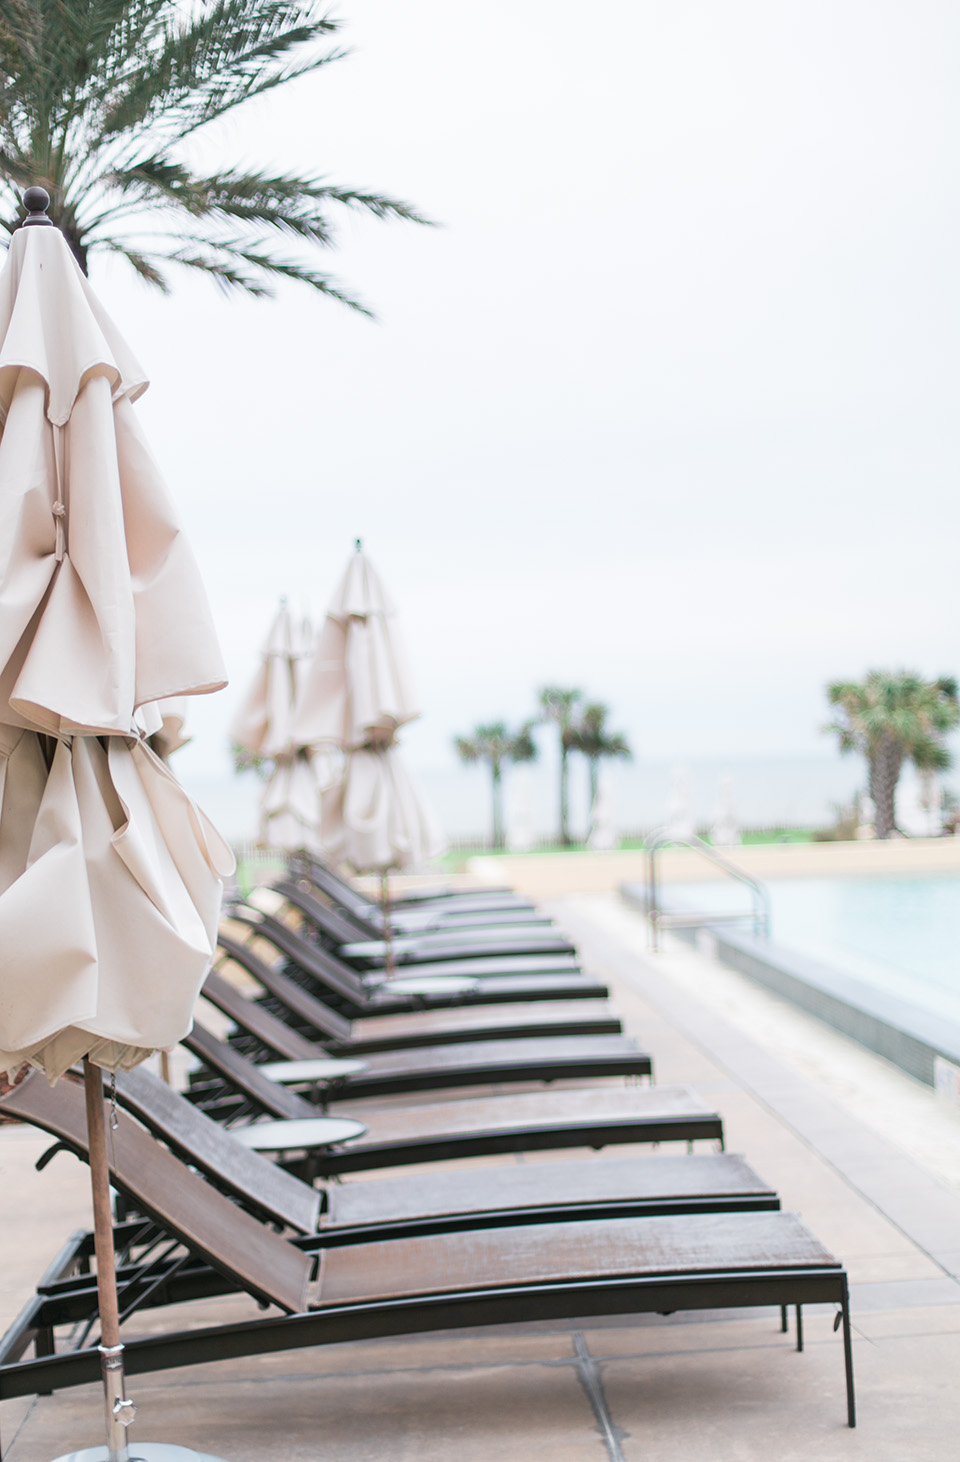 This is a picture of lounge chairs lined up in a row on a pool deck at the Omni Amelia Island Plantation Resort.